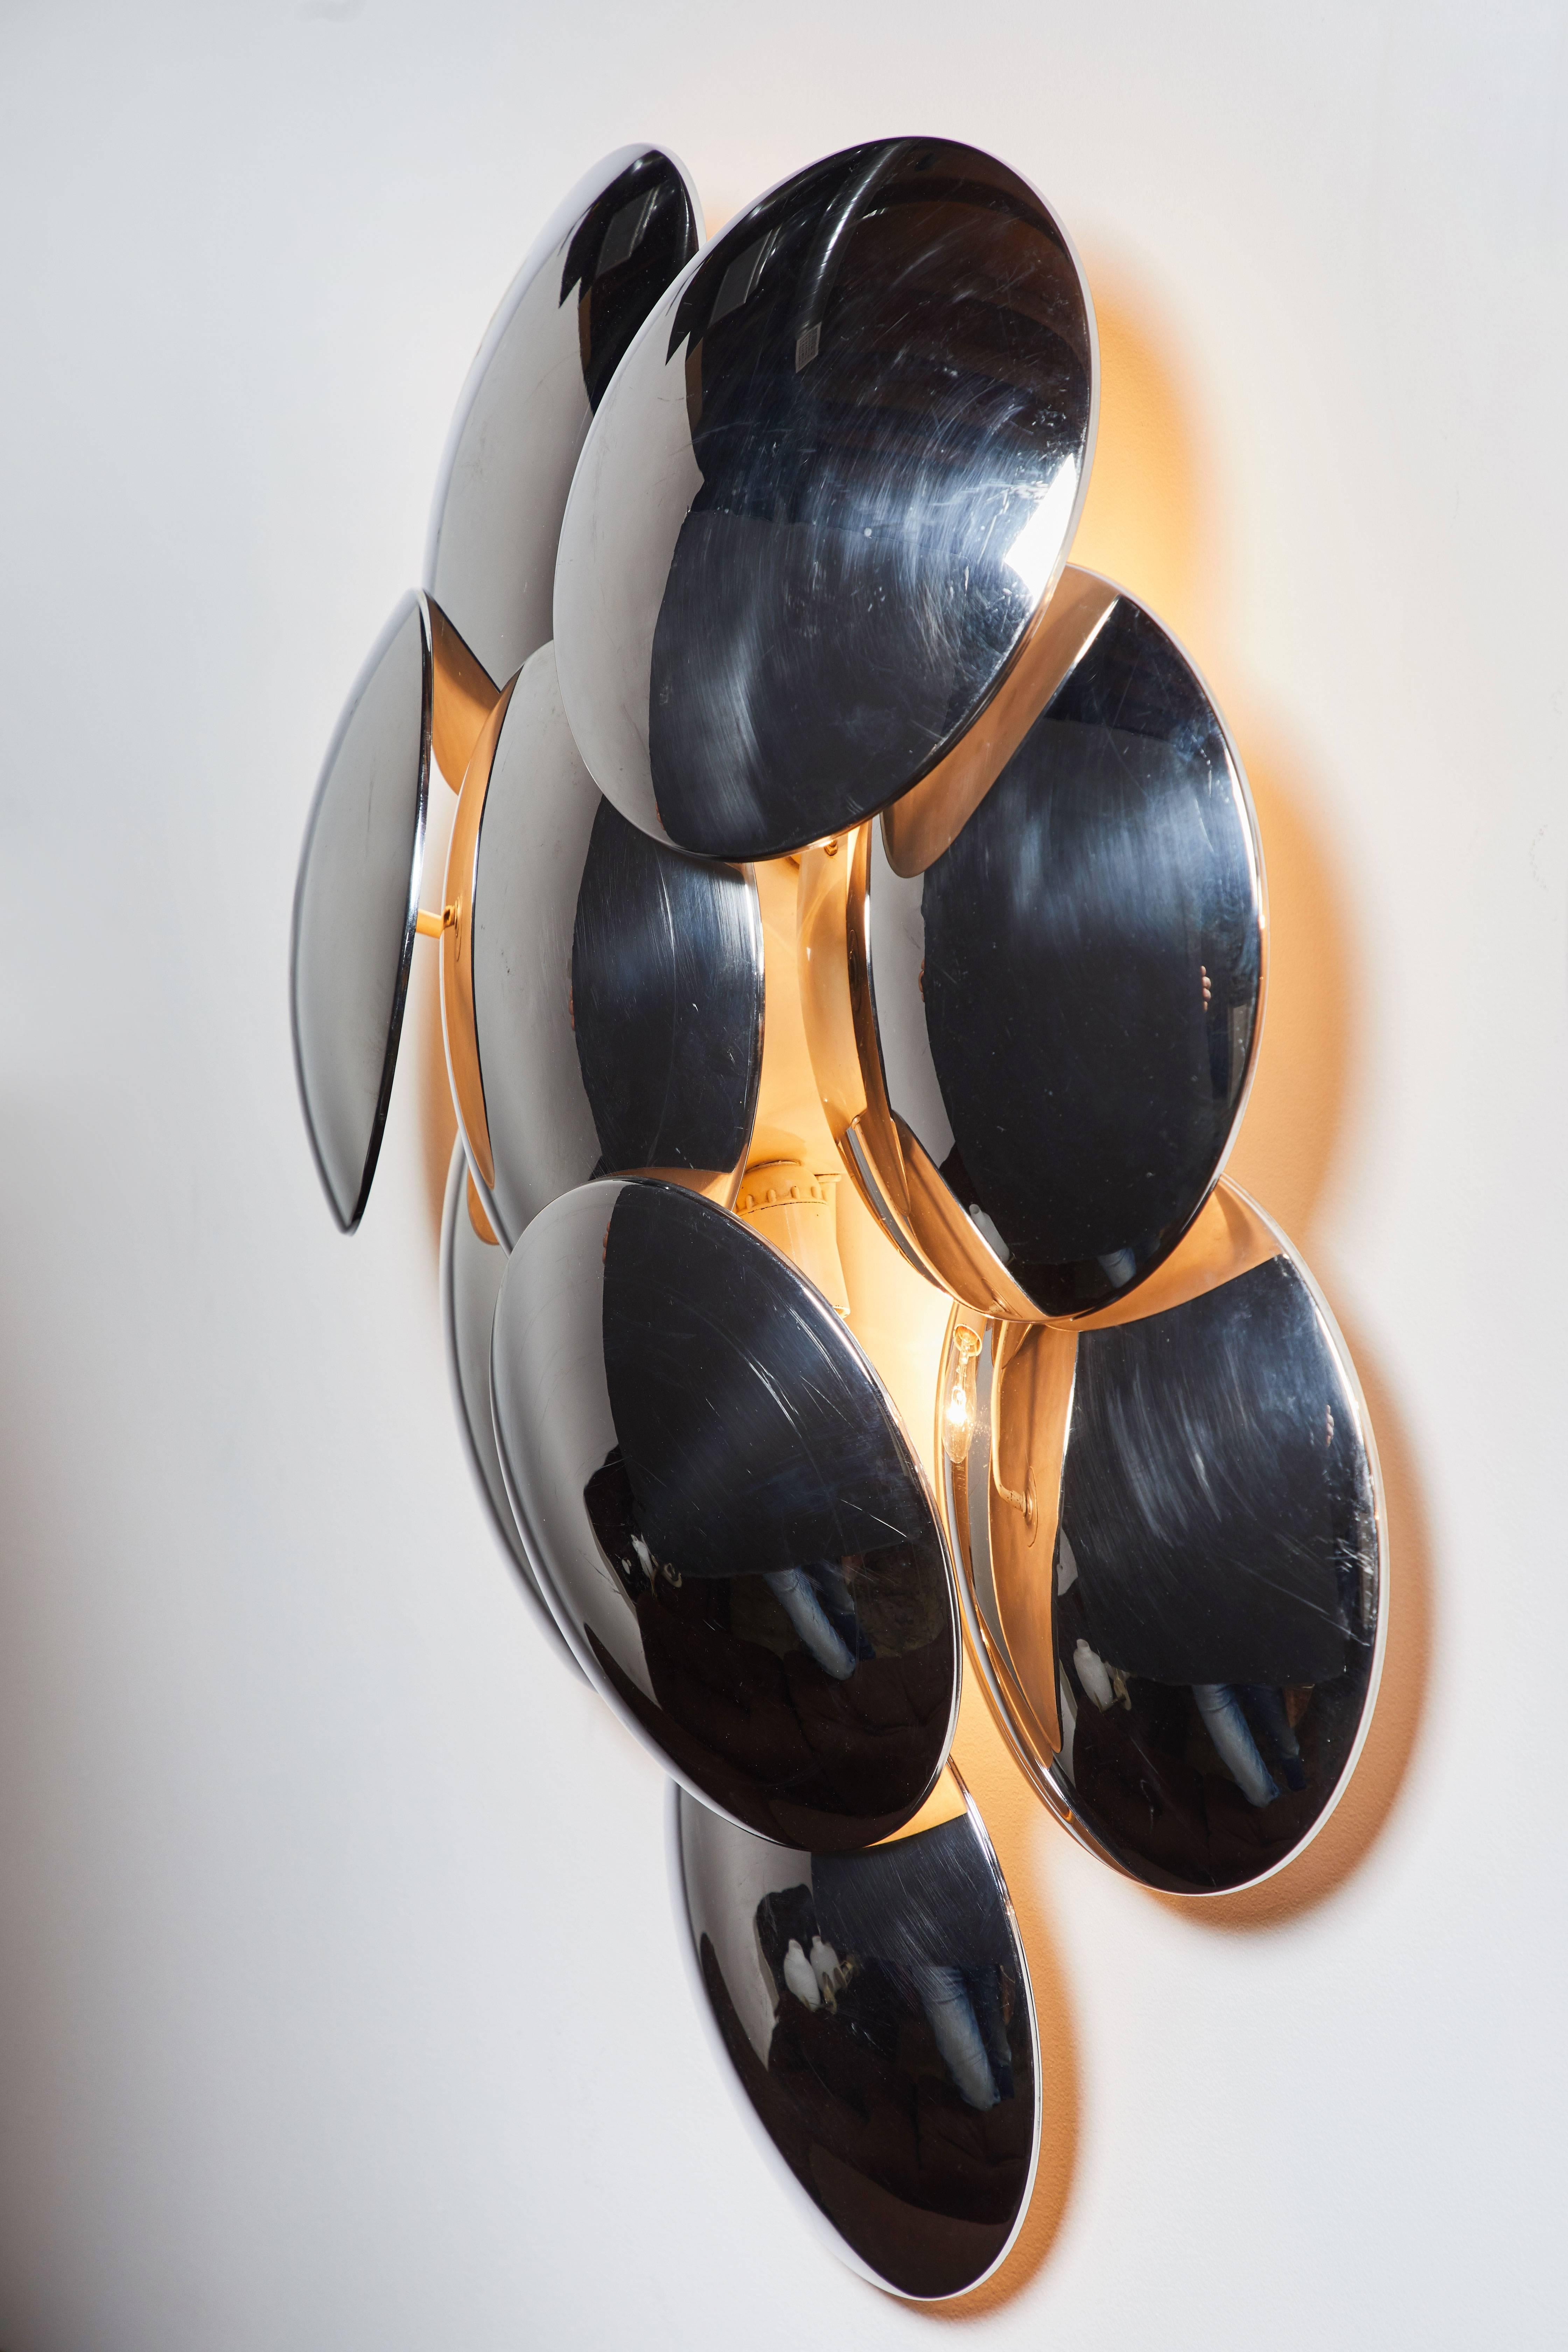 Mid-Century Modern Pair of Large Sconces by Goffredo Reggiani